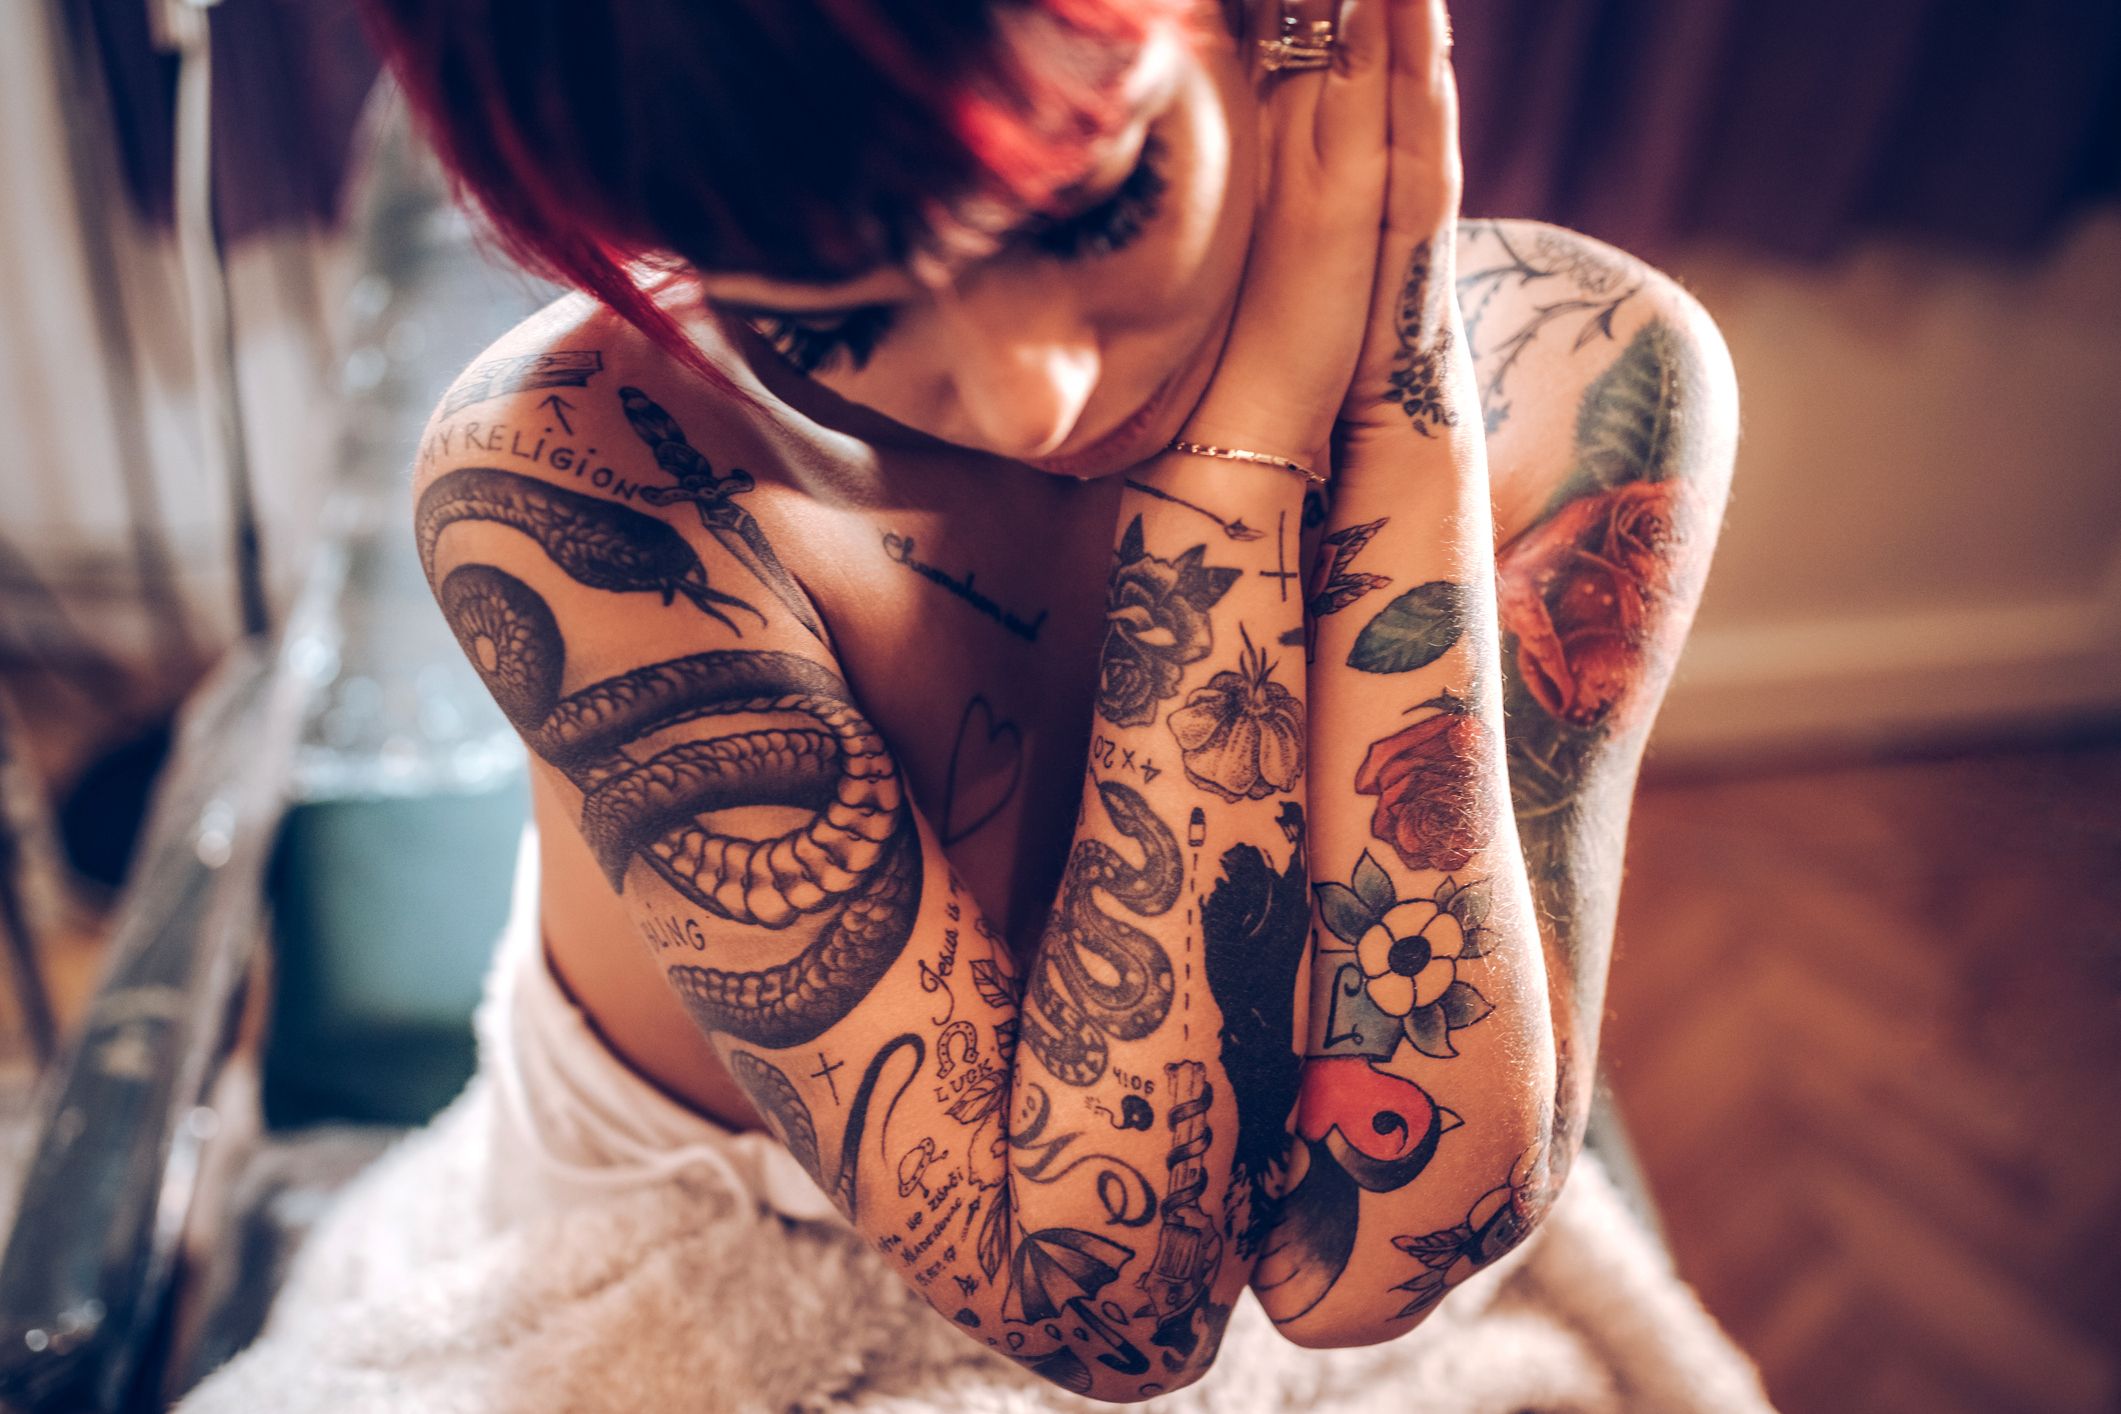 How To Take Care Of Your Tattoo in 5 Easy Steps The Ultimate Guide To   MrInkwells